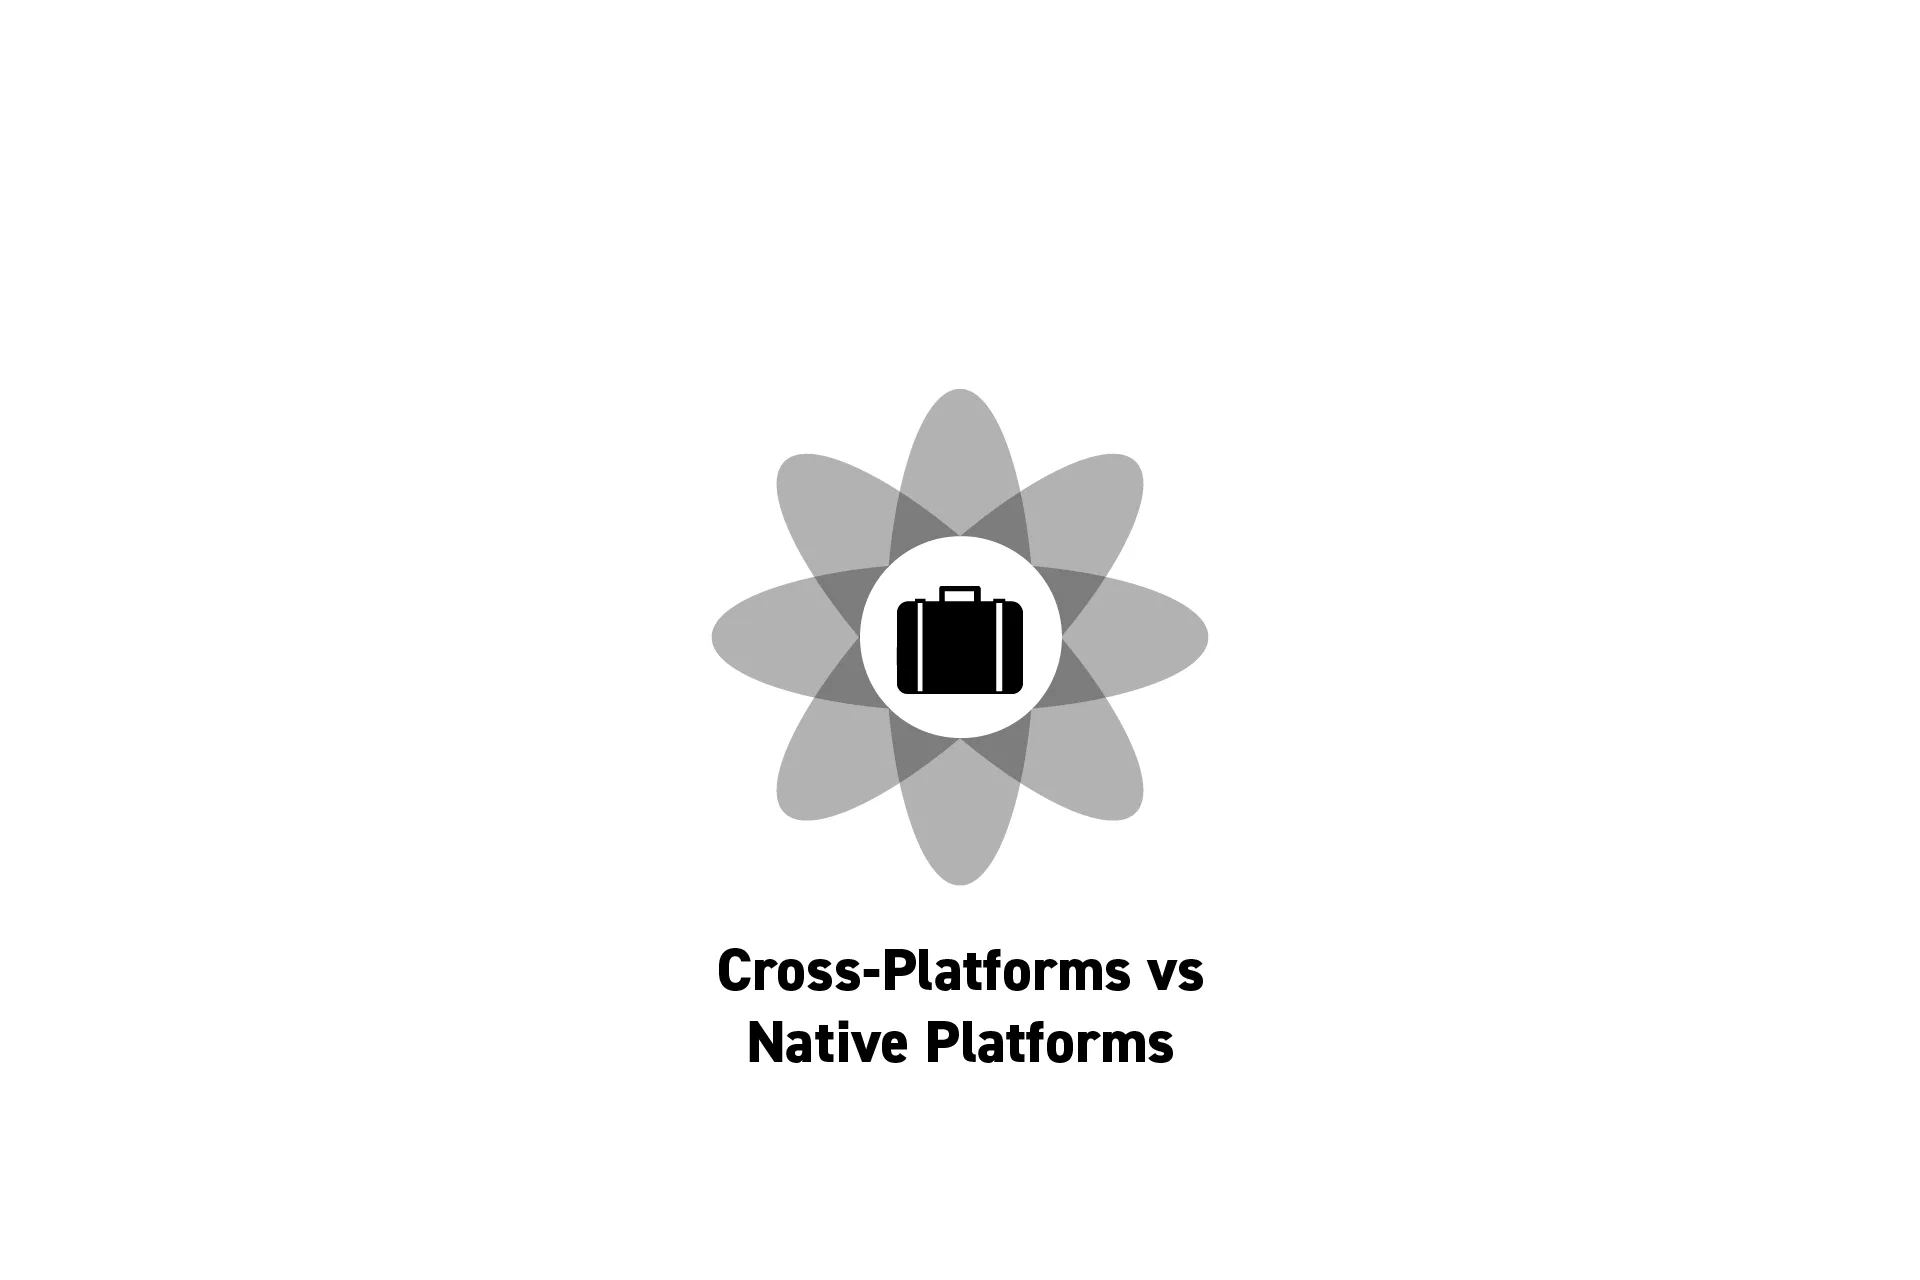 A flower that represents "Business" with the text "Cross-Platforms vs Native Platforms" beneath it.